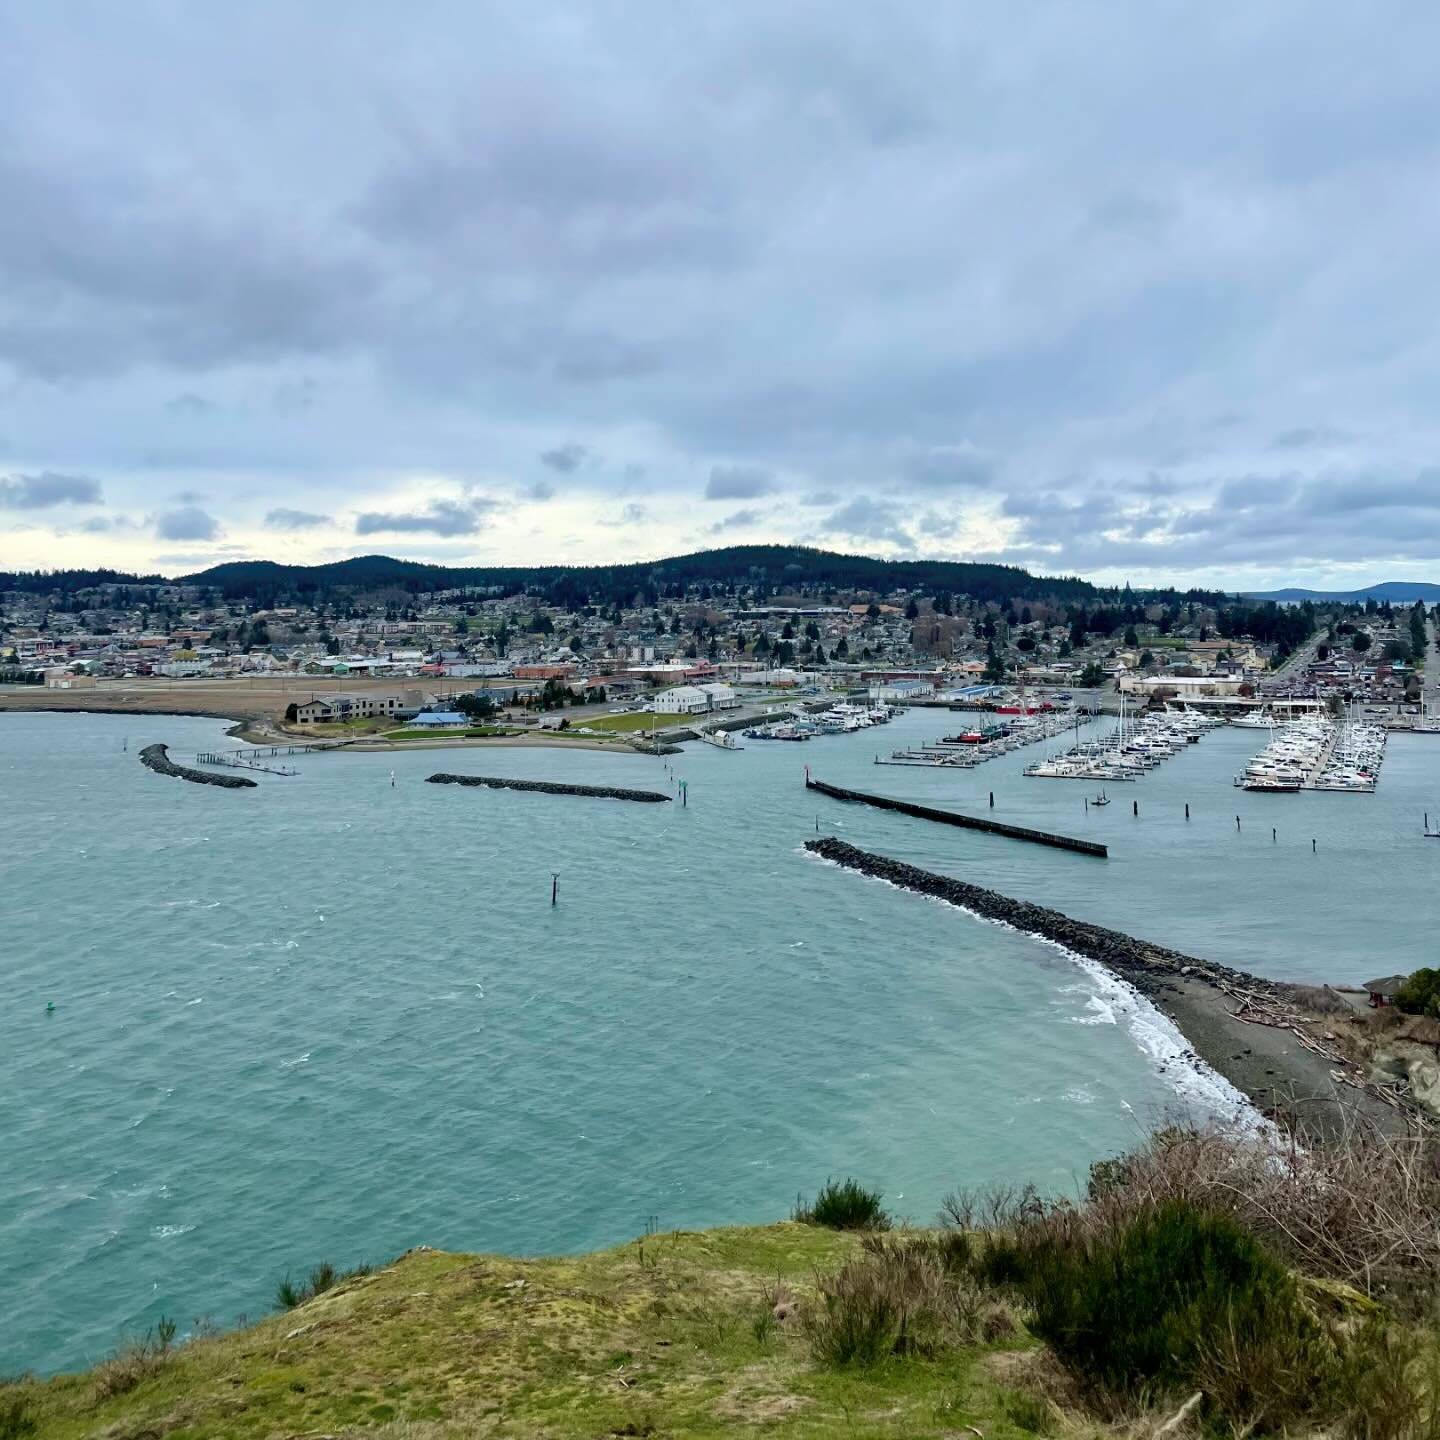 Mae and I had a blast exploring Anacortes on March 10th. I showed her some of the same spots I went to the first time I came to Anacortes 3.5 years ago. We started at Cap Sante Park and then went for a walk around Washington Park. It was a bit cold a